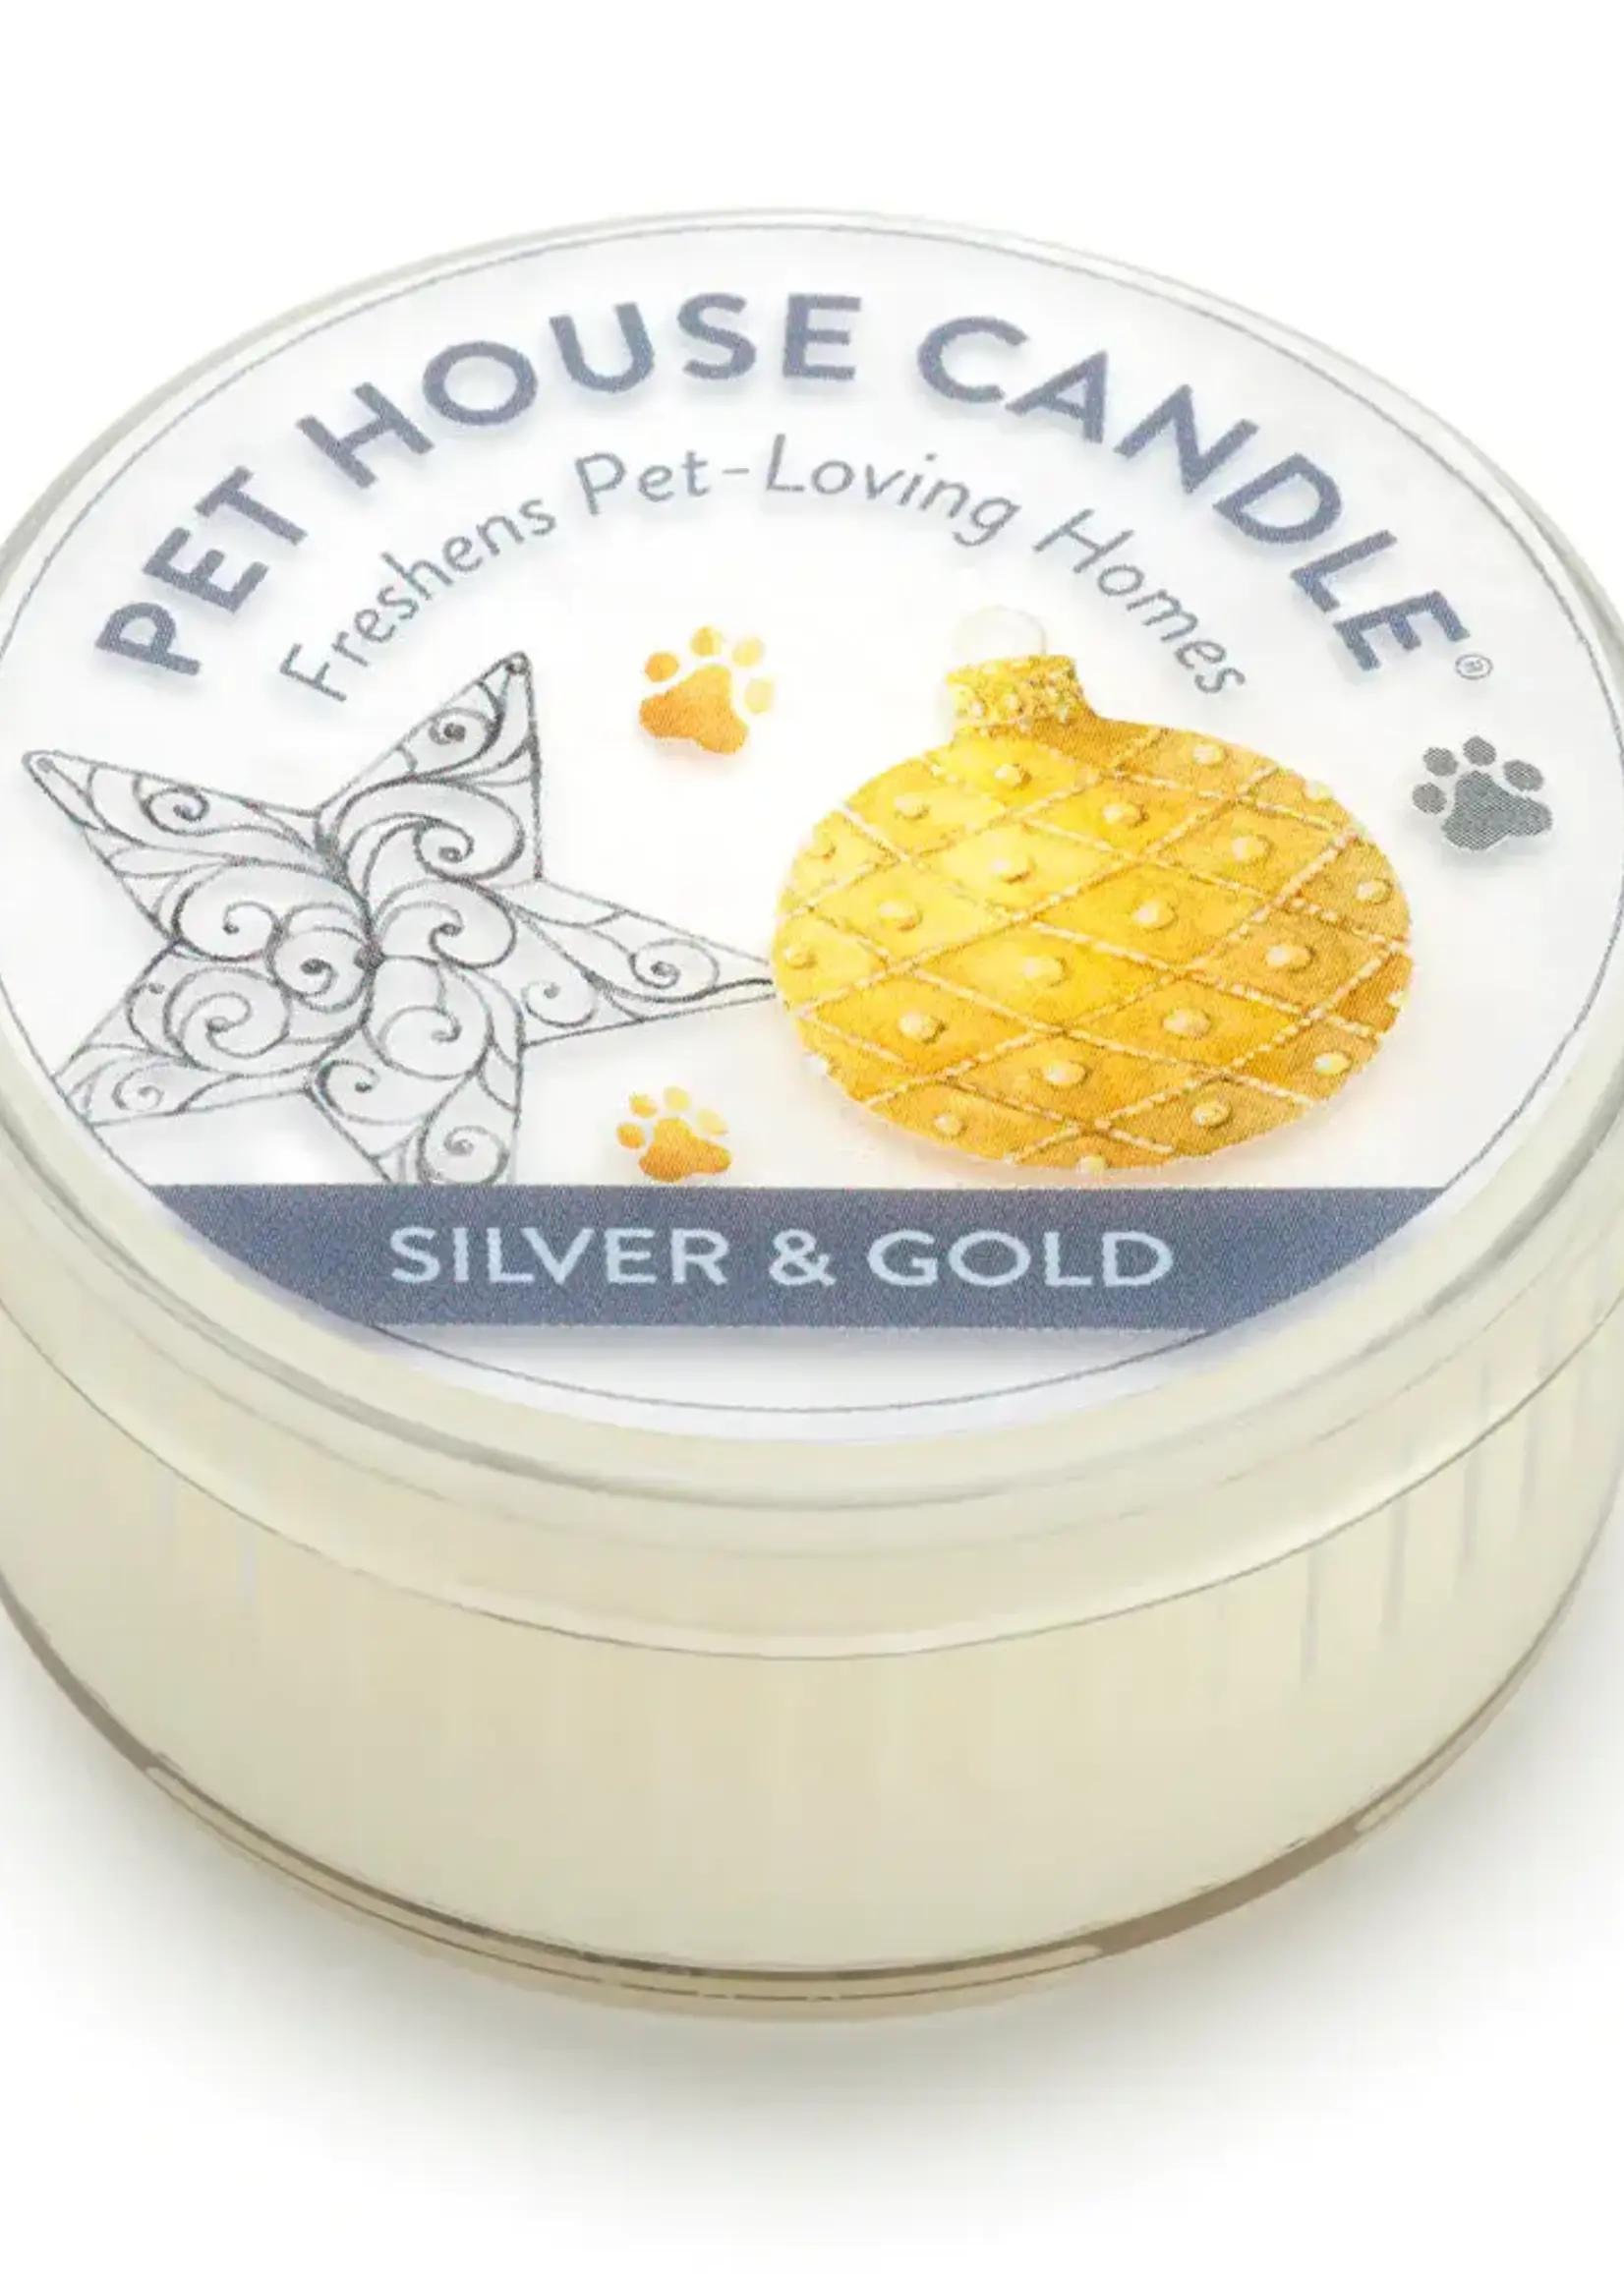 Pet House by One Fur All Silver & Gold Mini Candle 1.5 oz